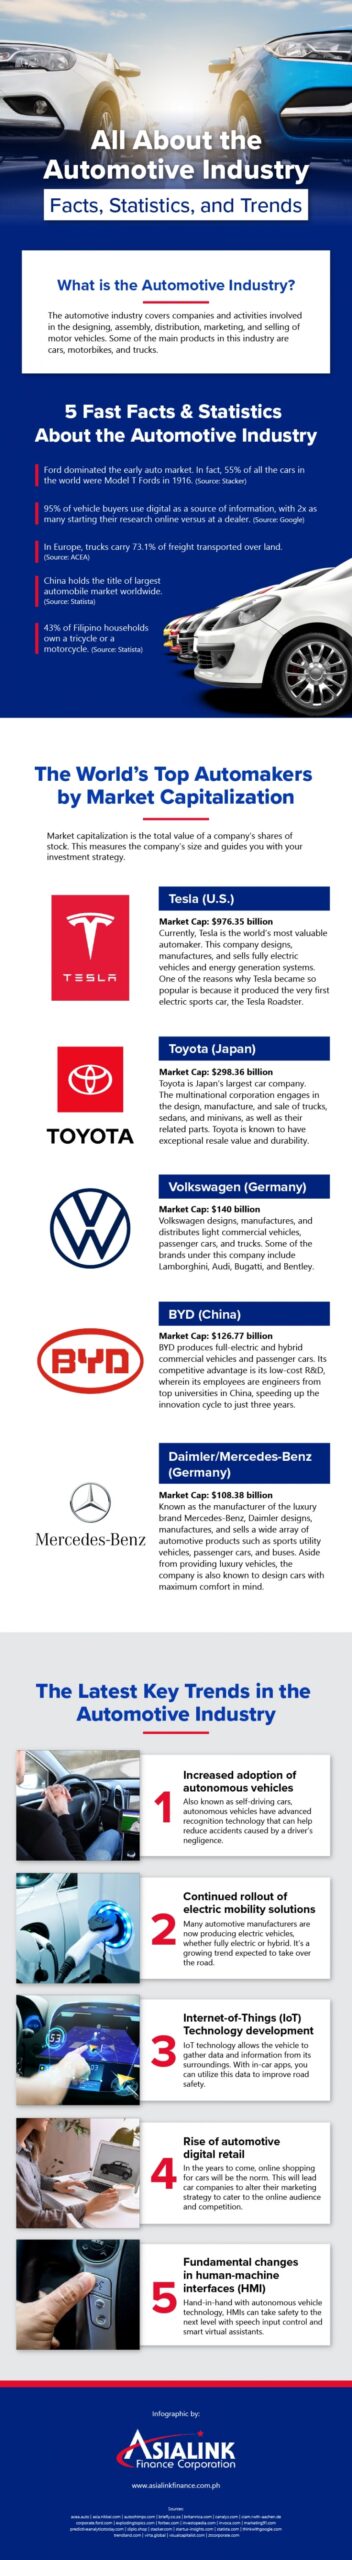 All About the Automotive Industry: Facts, Trends, and Statistics